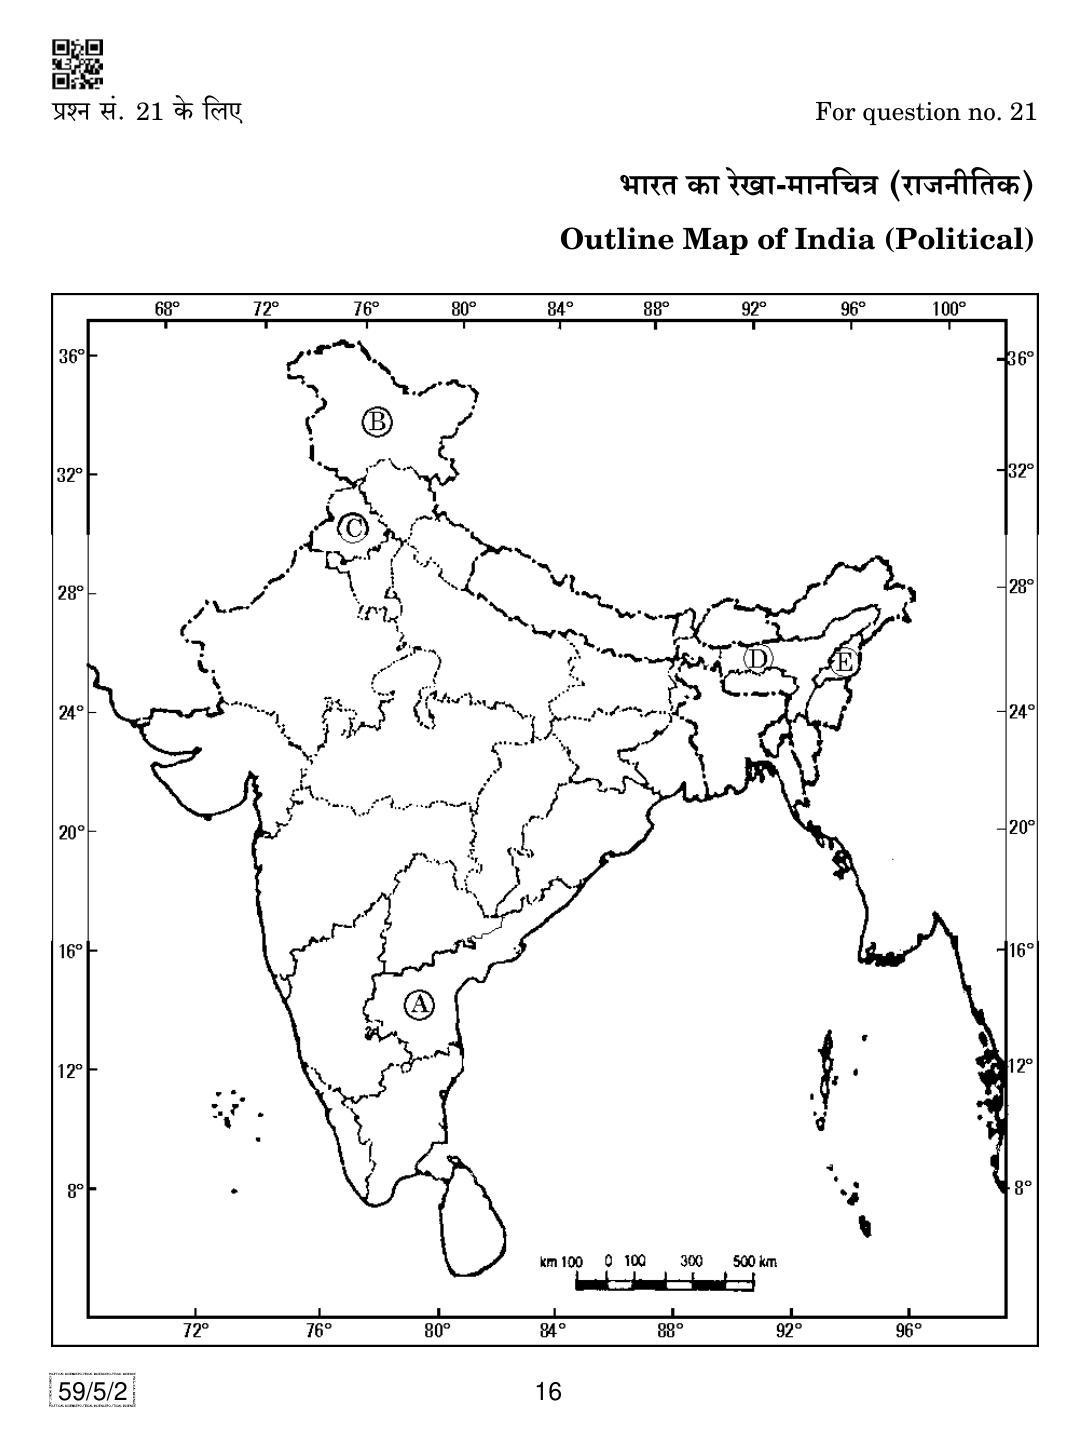 CBSE Class 12 59-5-2 Political Science 2019 Question Paper - Page 16